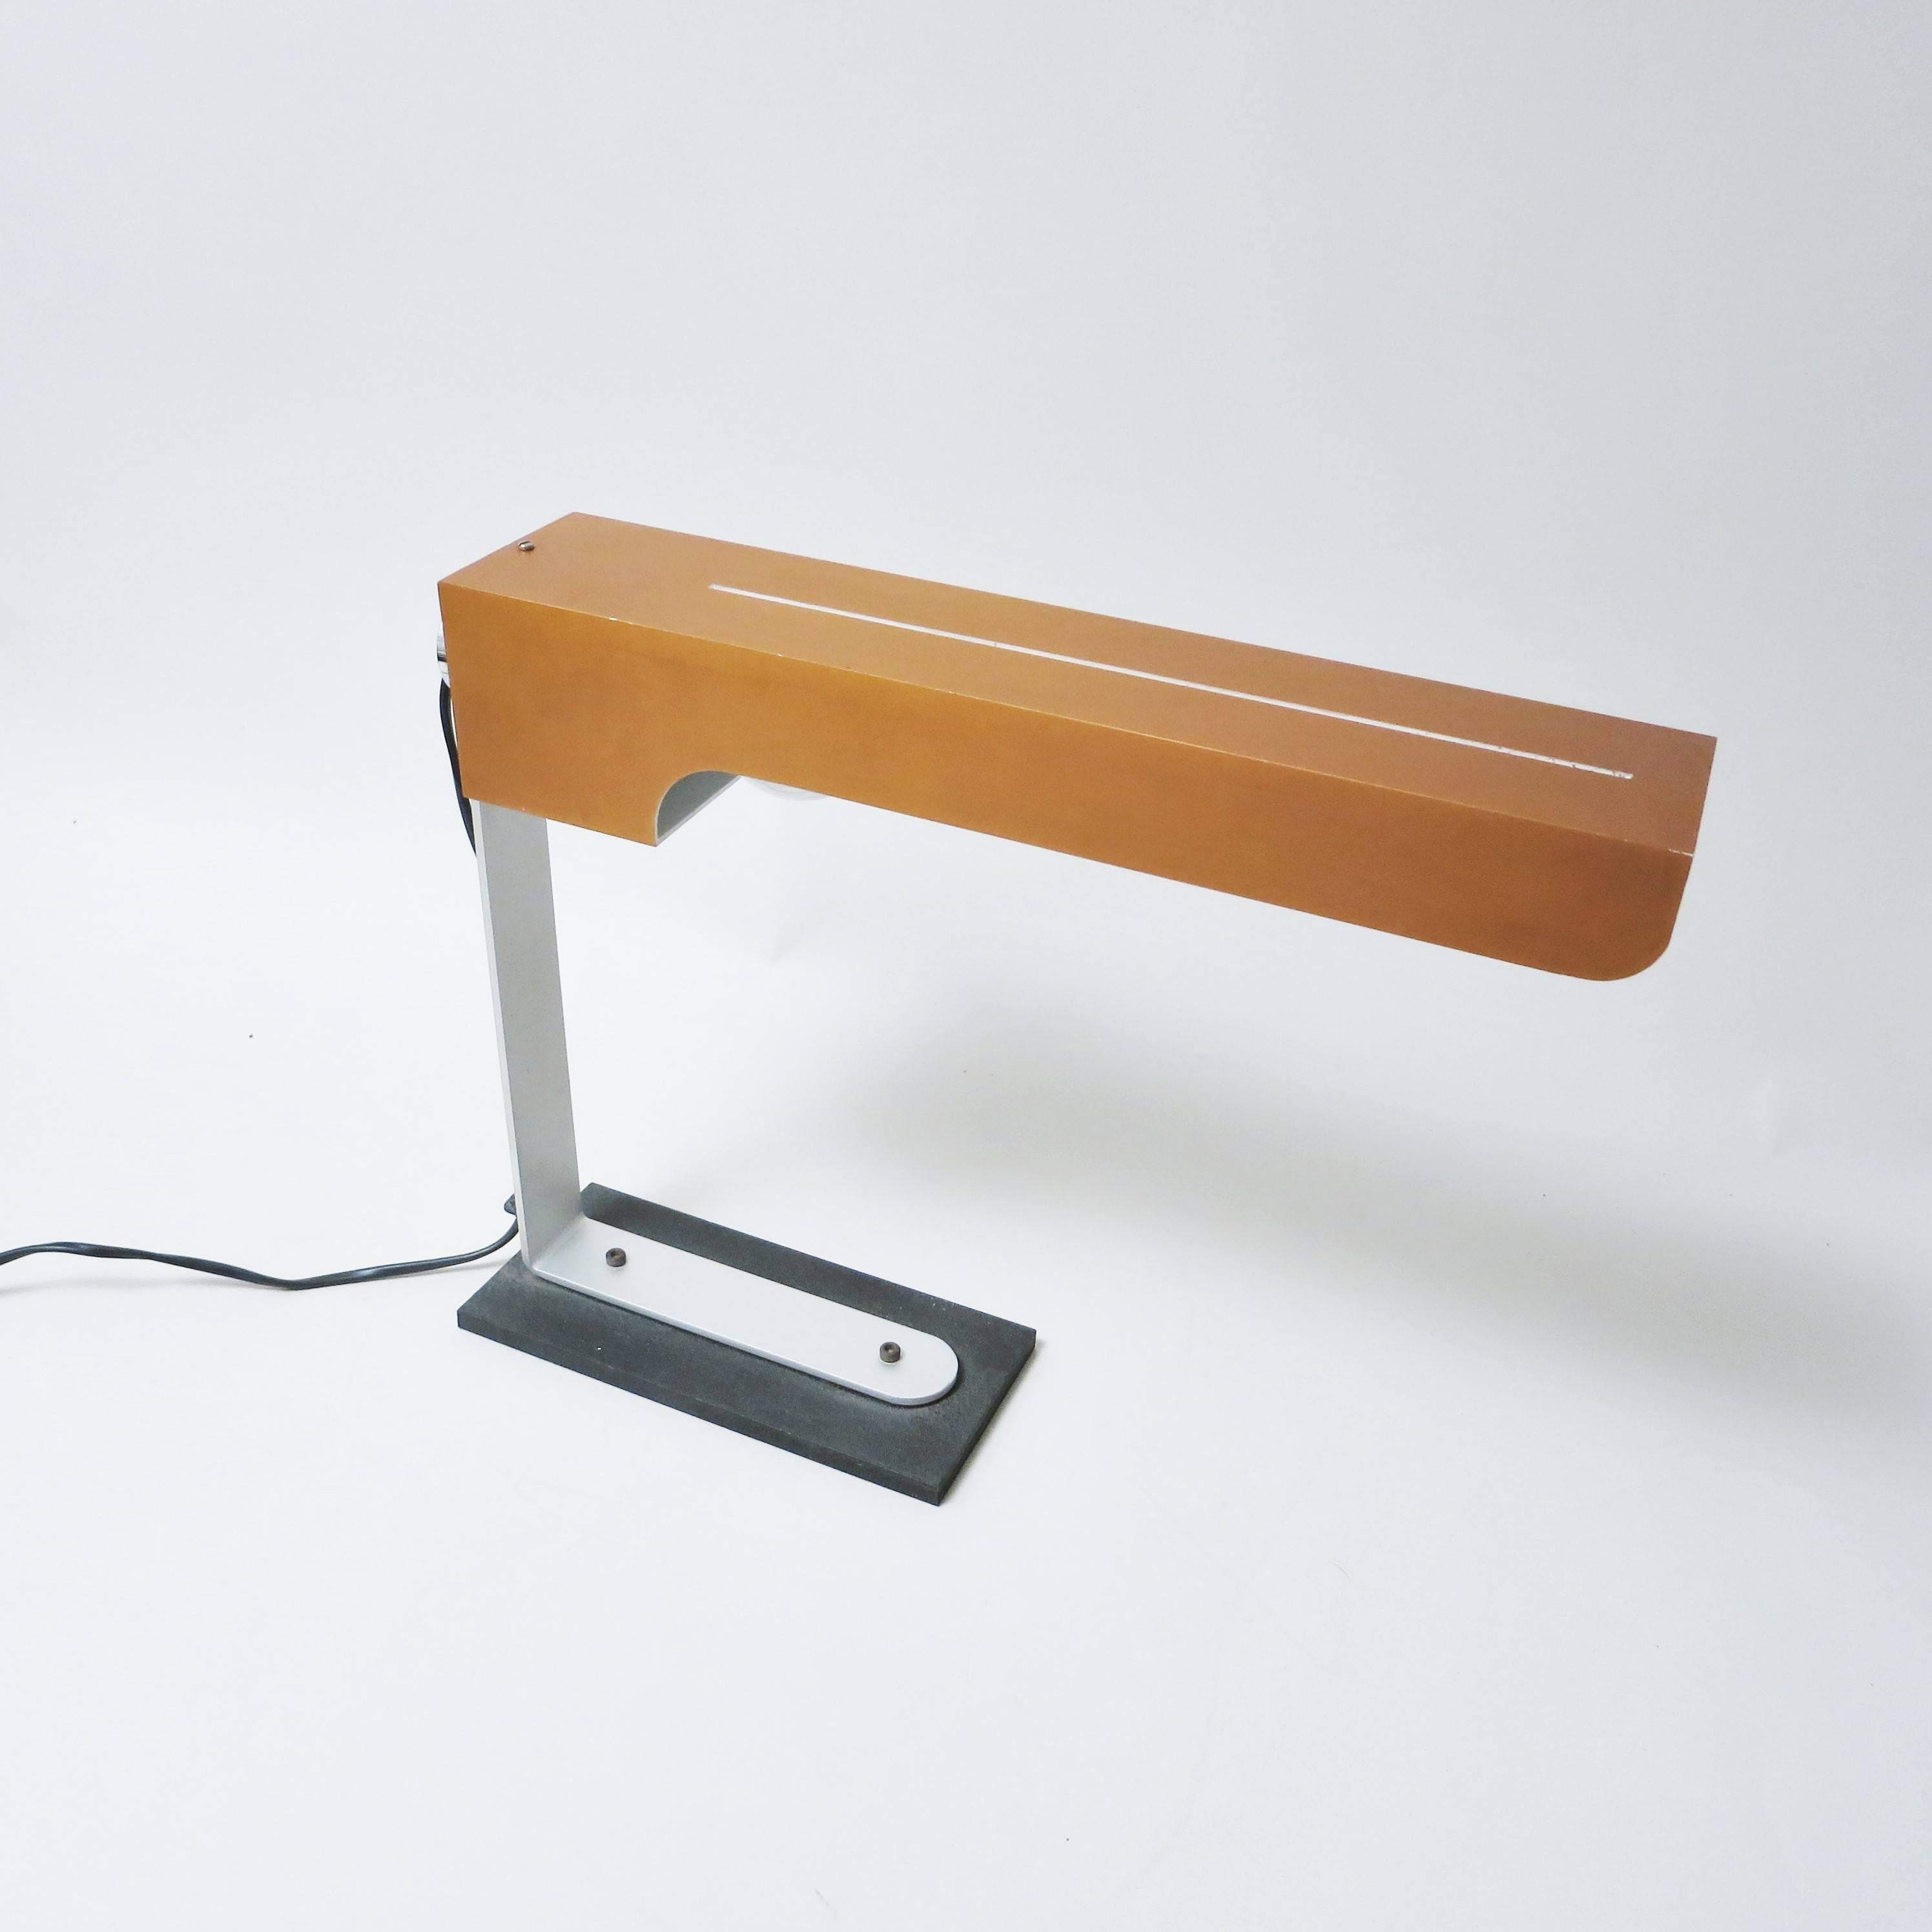 Rare Italian Mid-Century Modern desk lamp with a steel base, an aluminium arm and a large copper shade in the manner of Giancarlo Frattini, circa 1960.